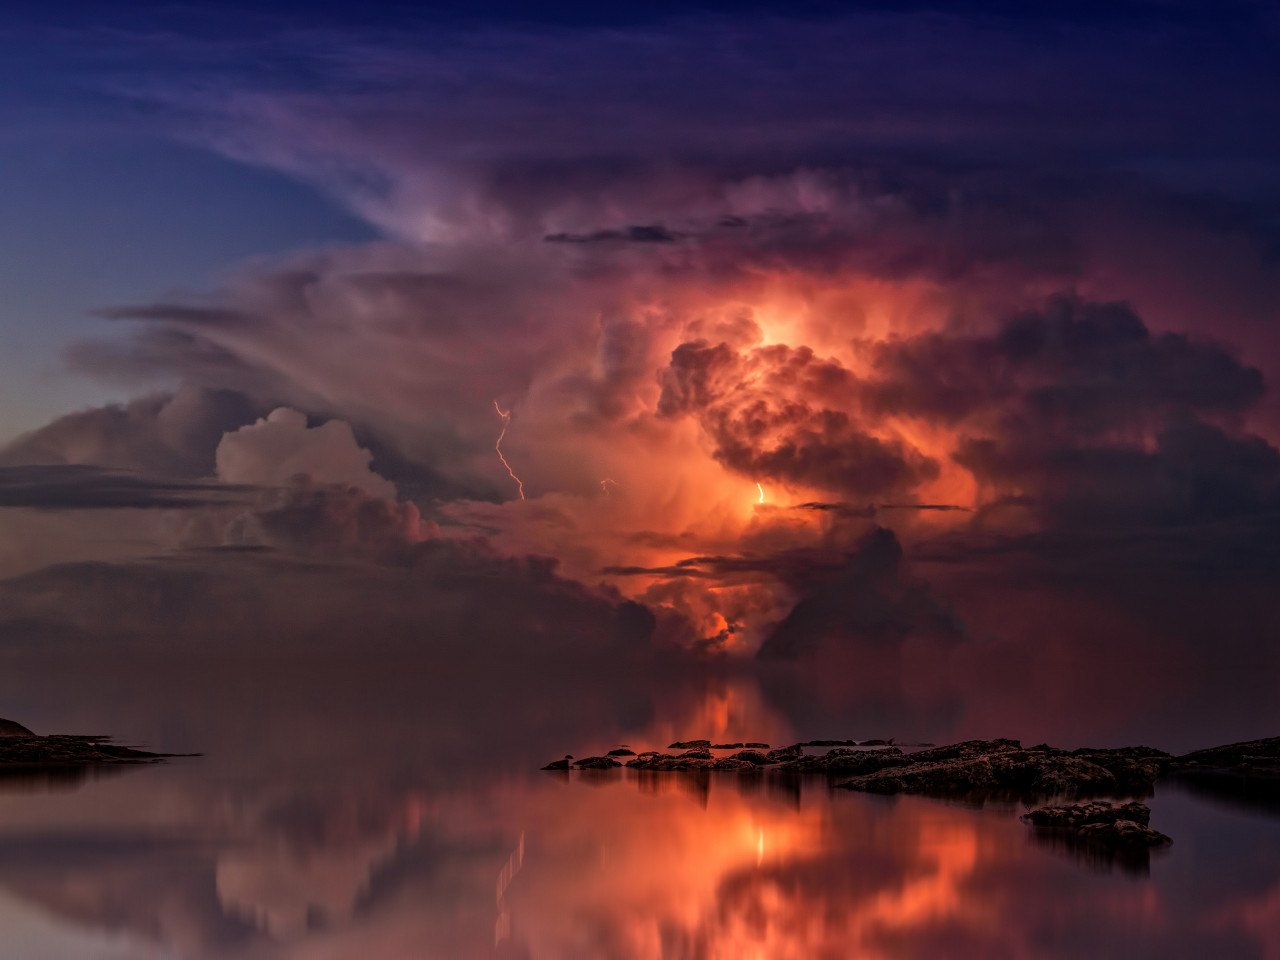 Lightning and thunderstorm in the sky wallpaper 1280x960